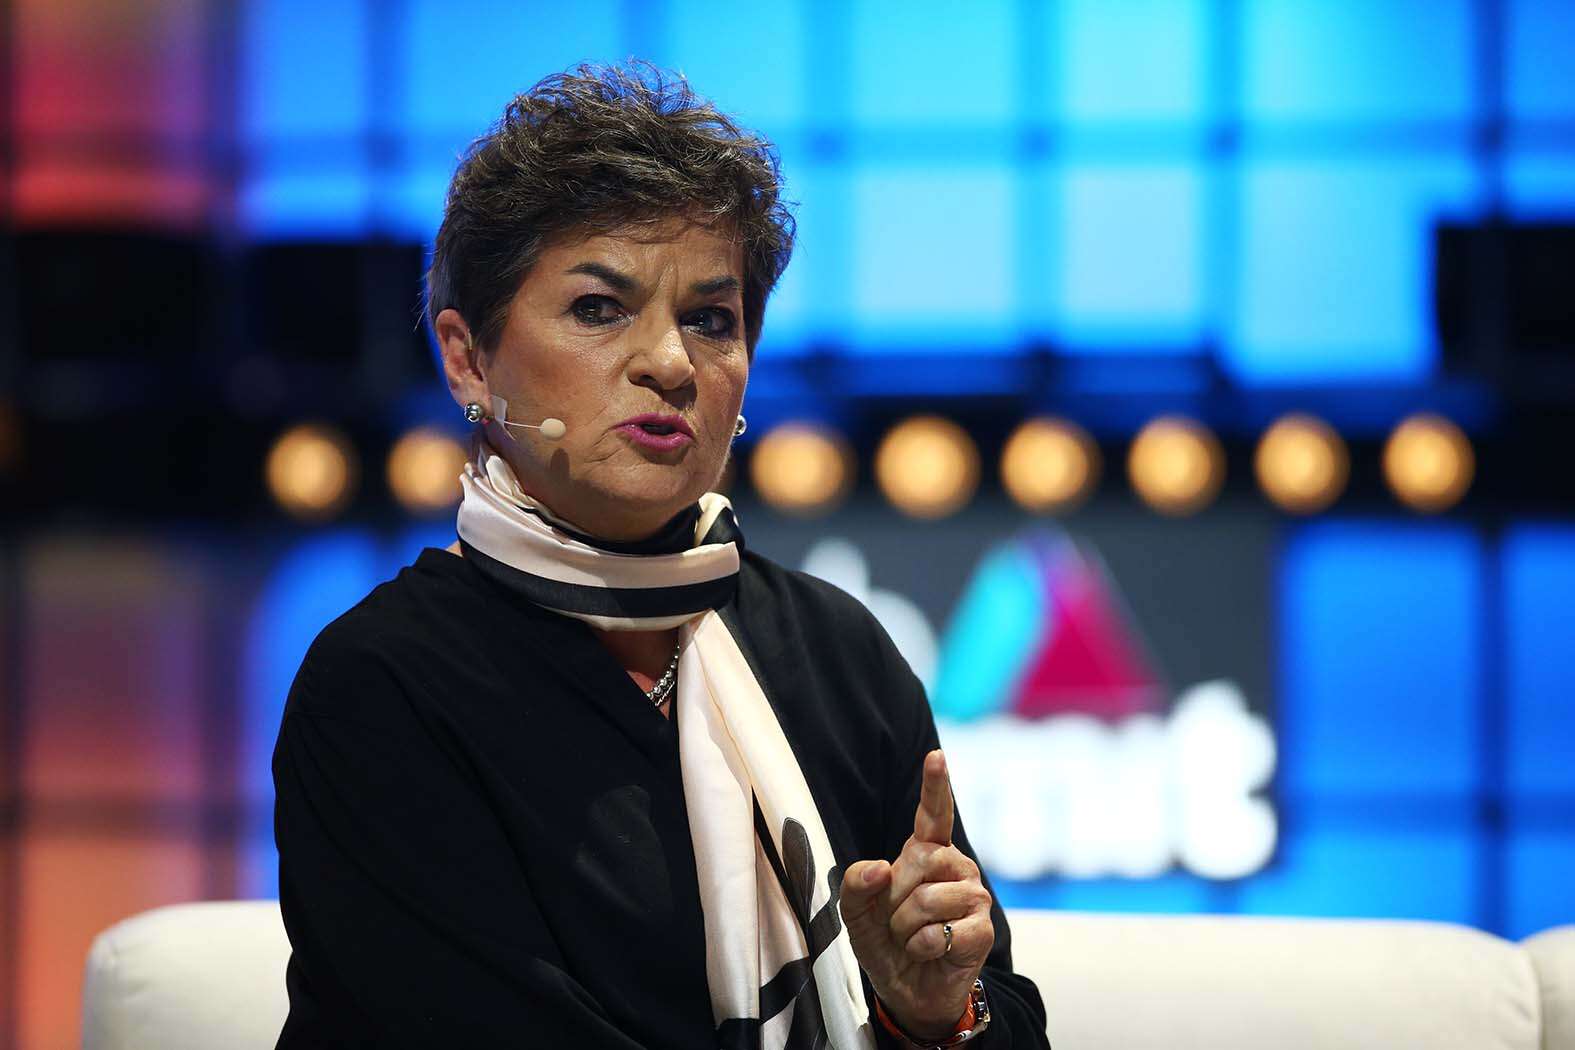 Christiana Figueres: if we fail on climate, we fail on human rights, education and health